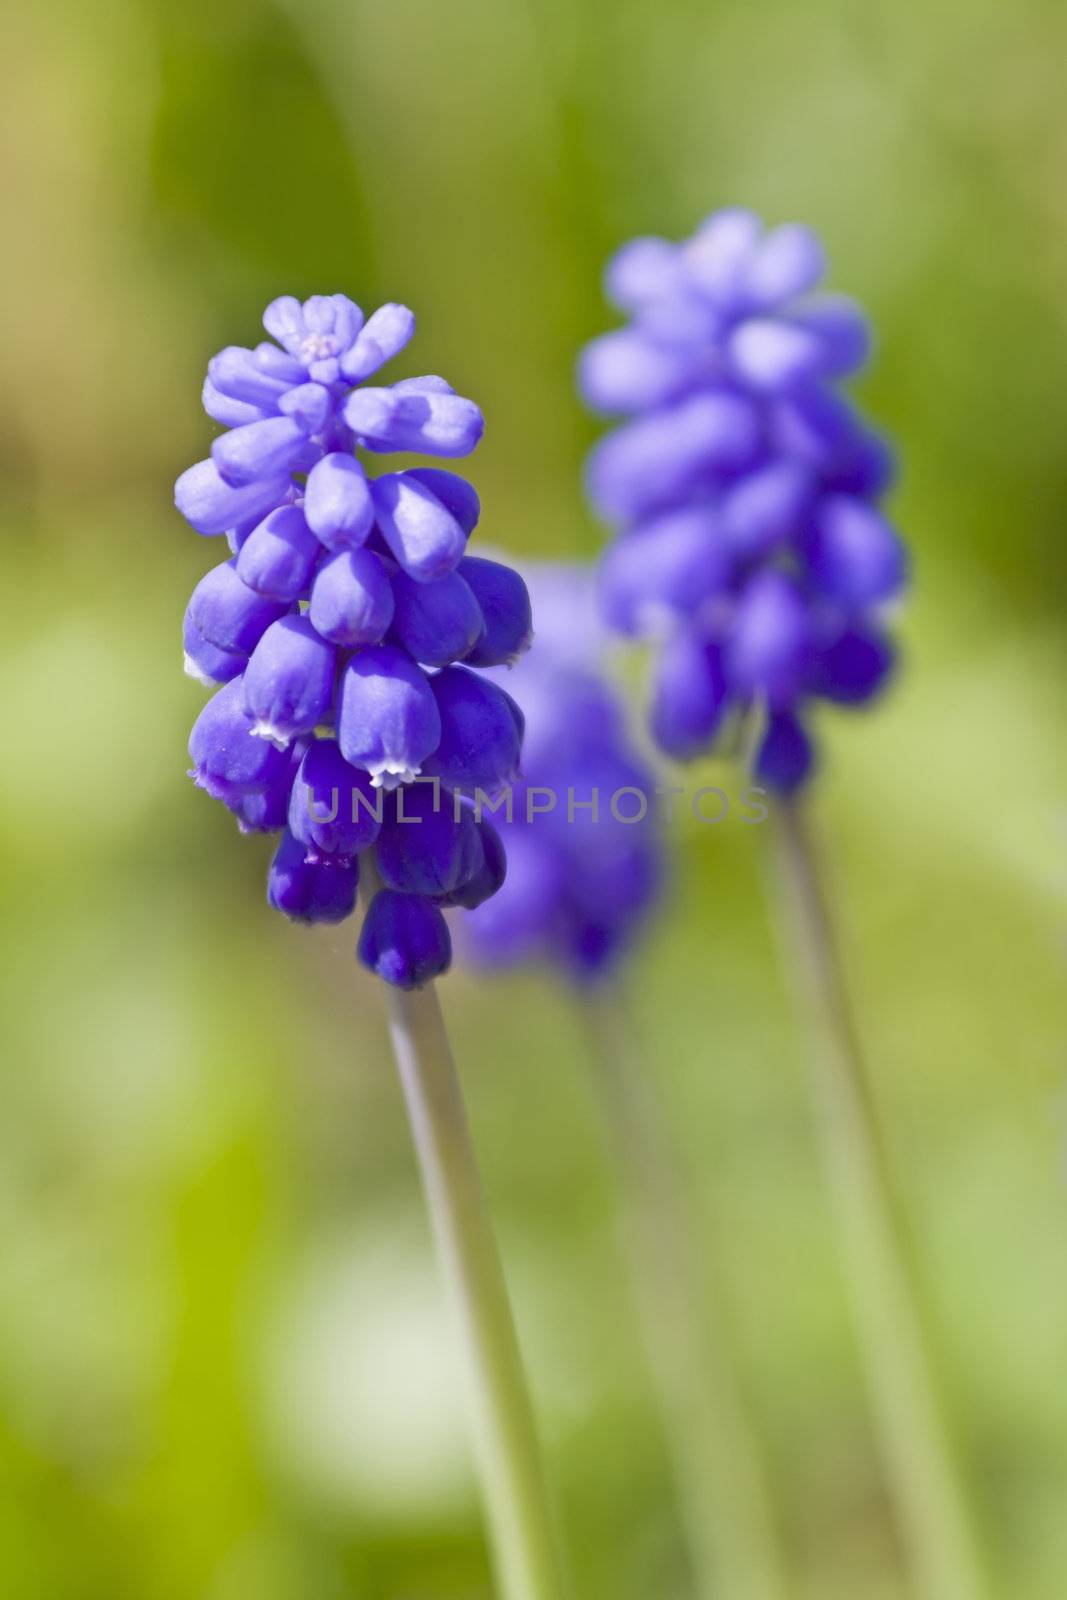 This image shows a macro from a grape hyacinth